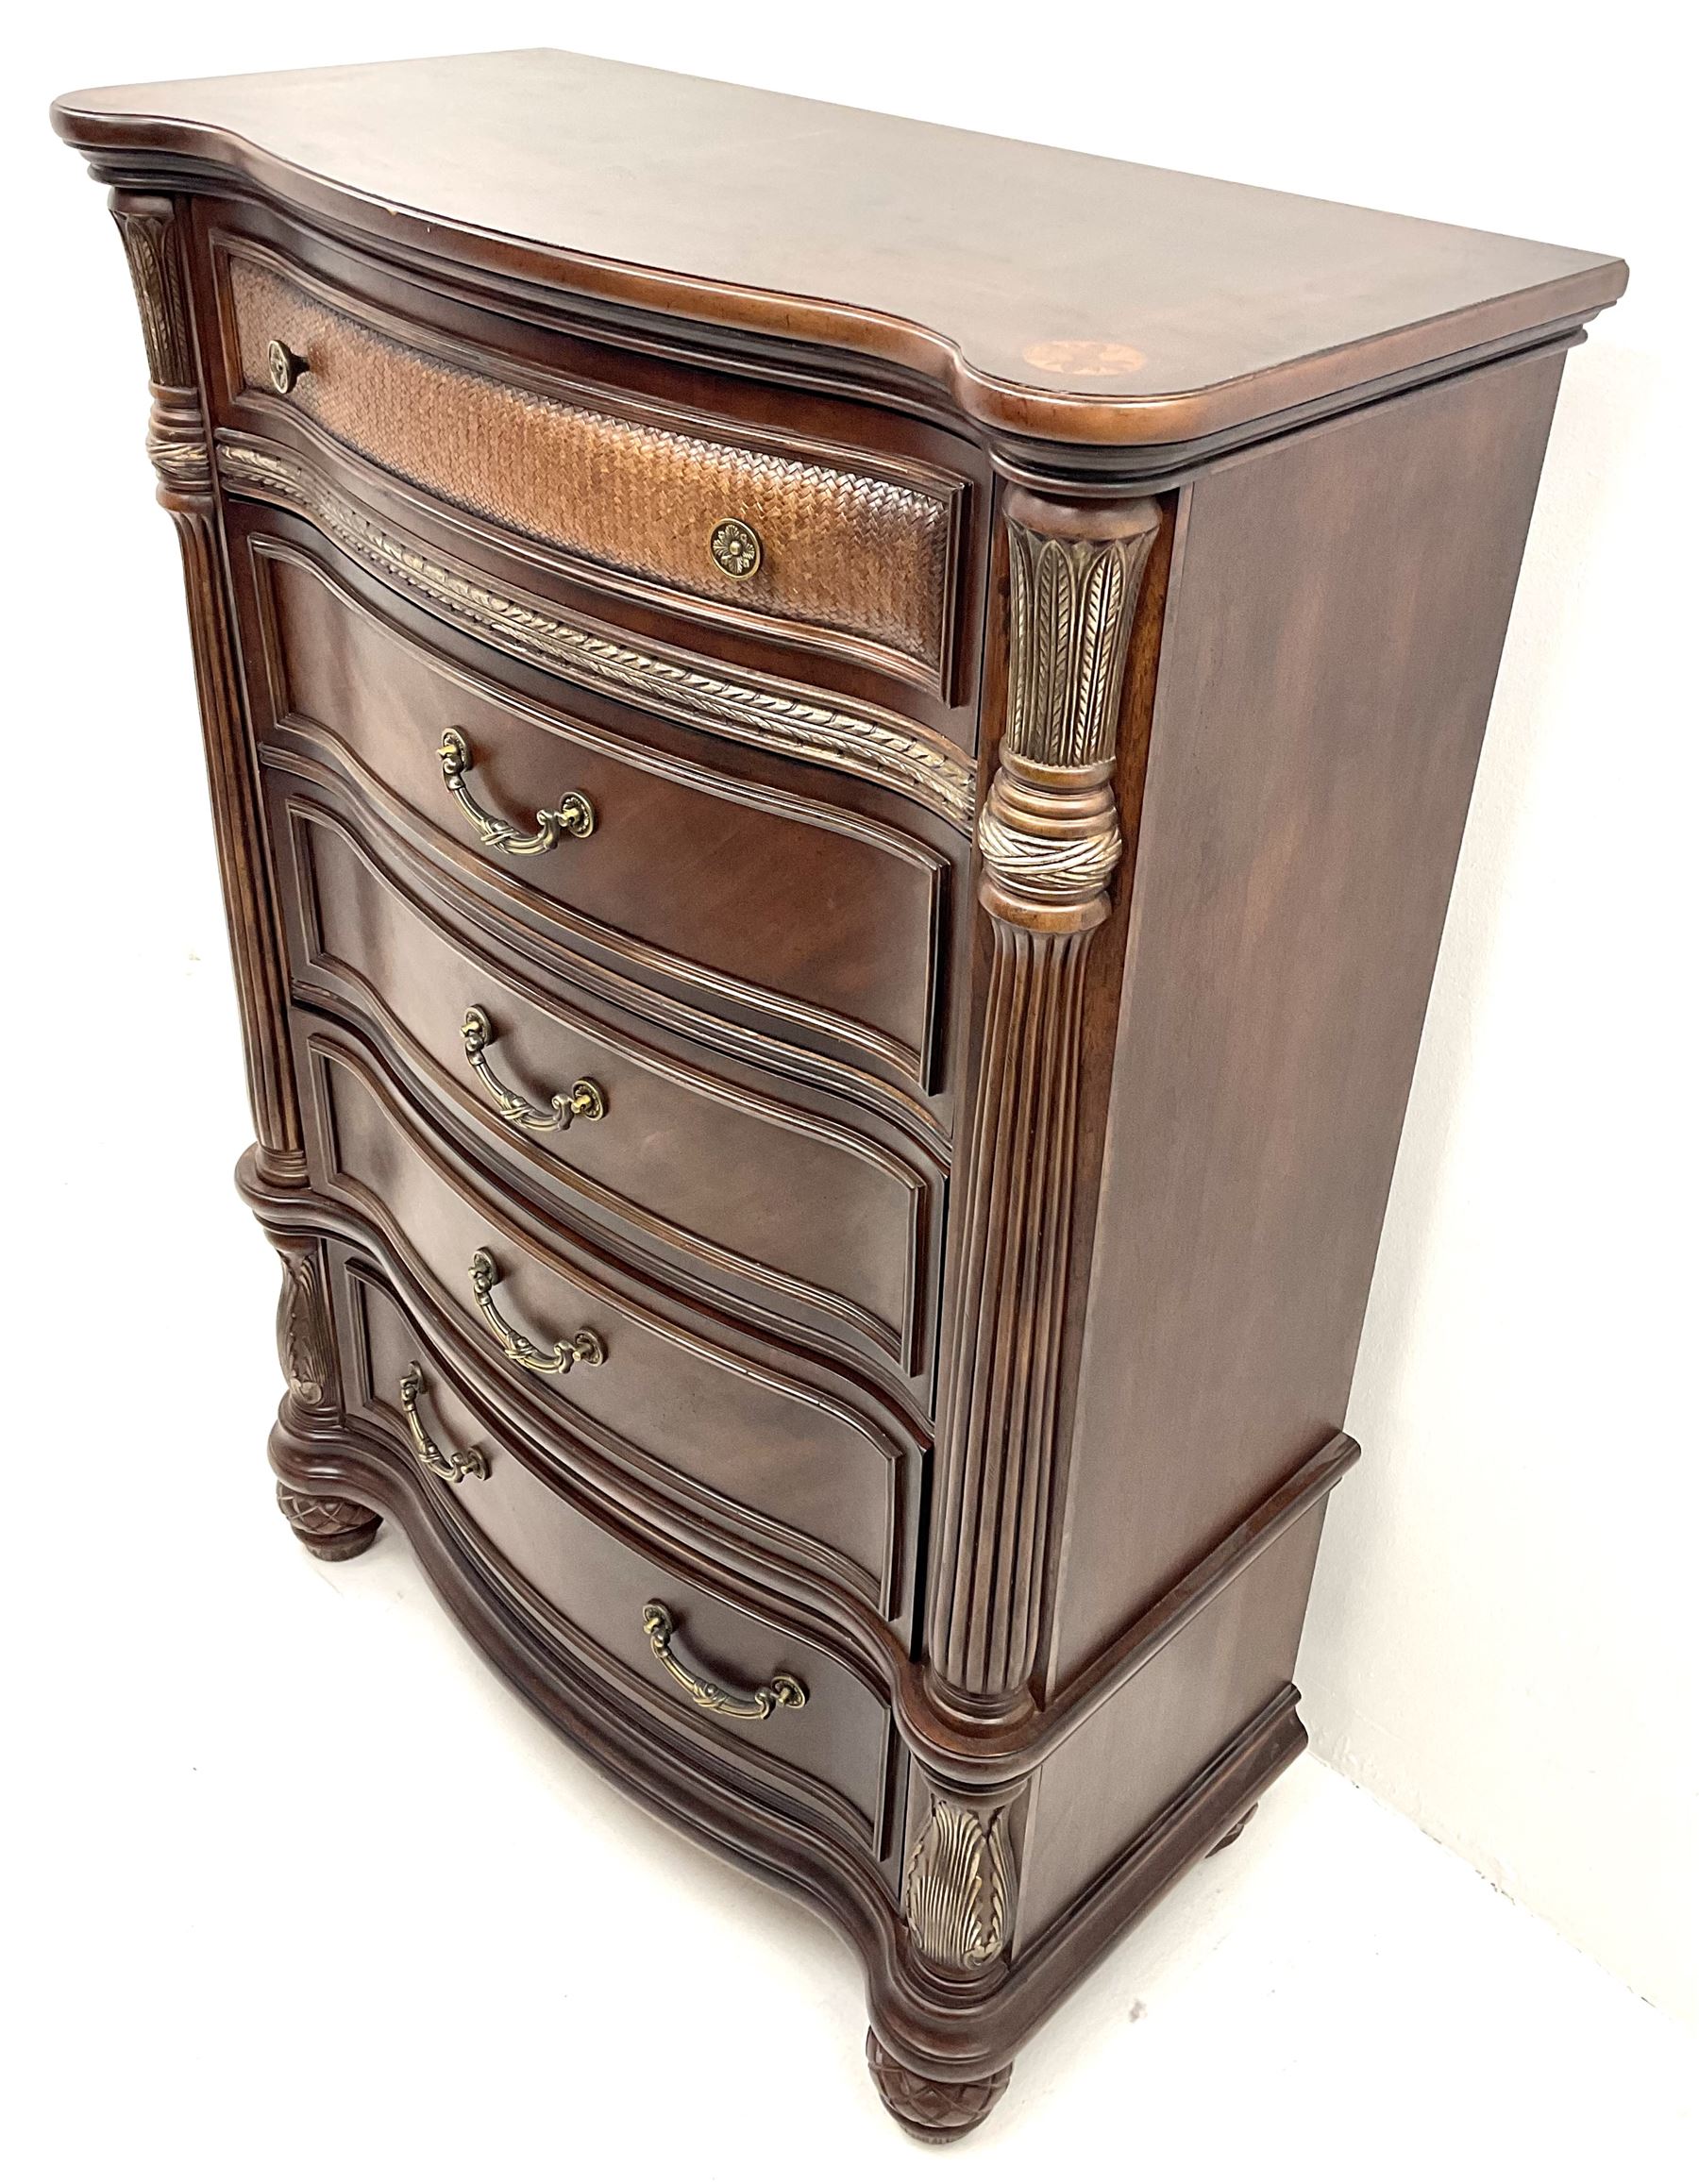 Kevin Charles American walnut serpentine chest - Image 2 of 6